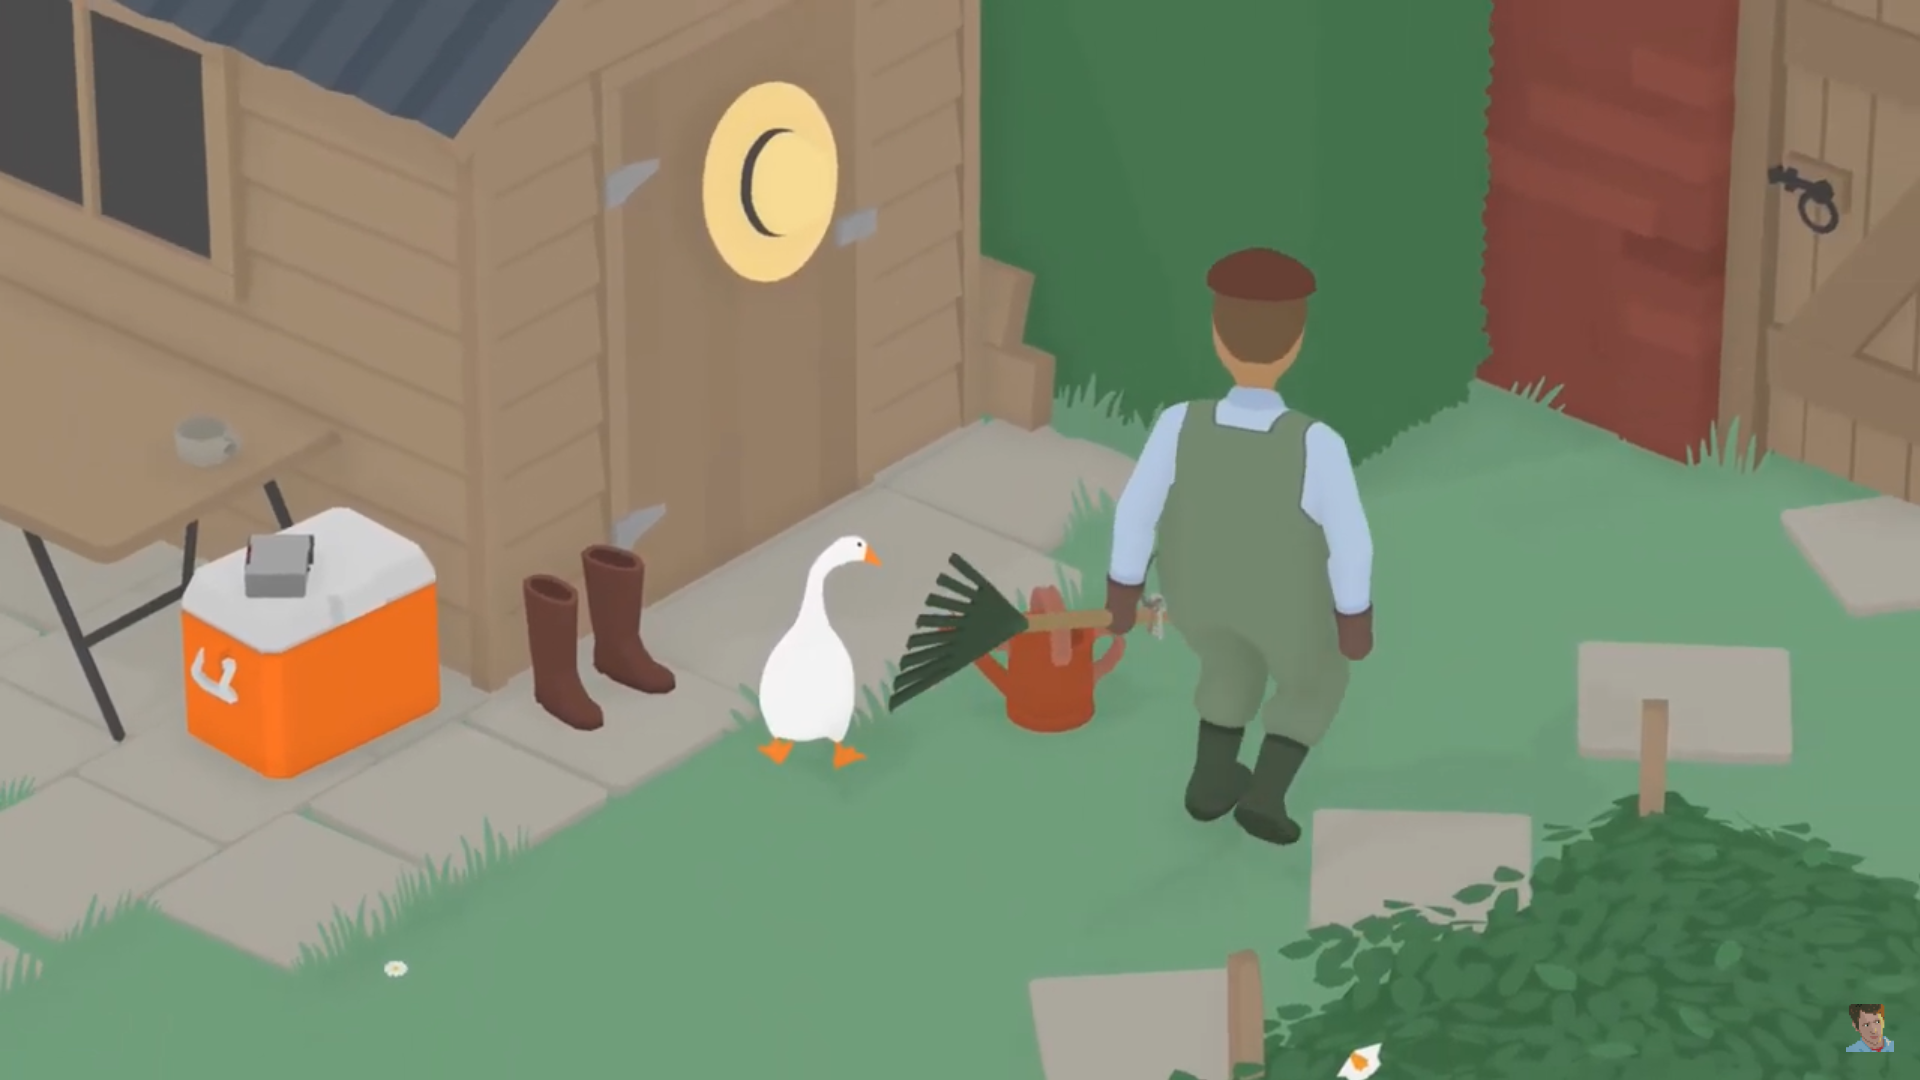 Make the groundskeeper wear his sun hat, Untitled Goose Game Wiki